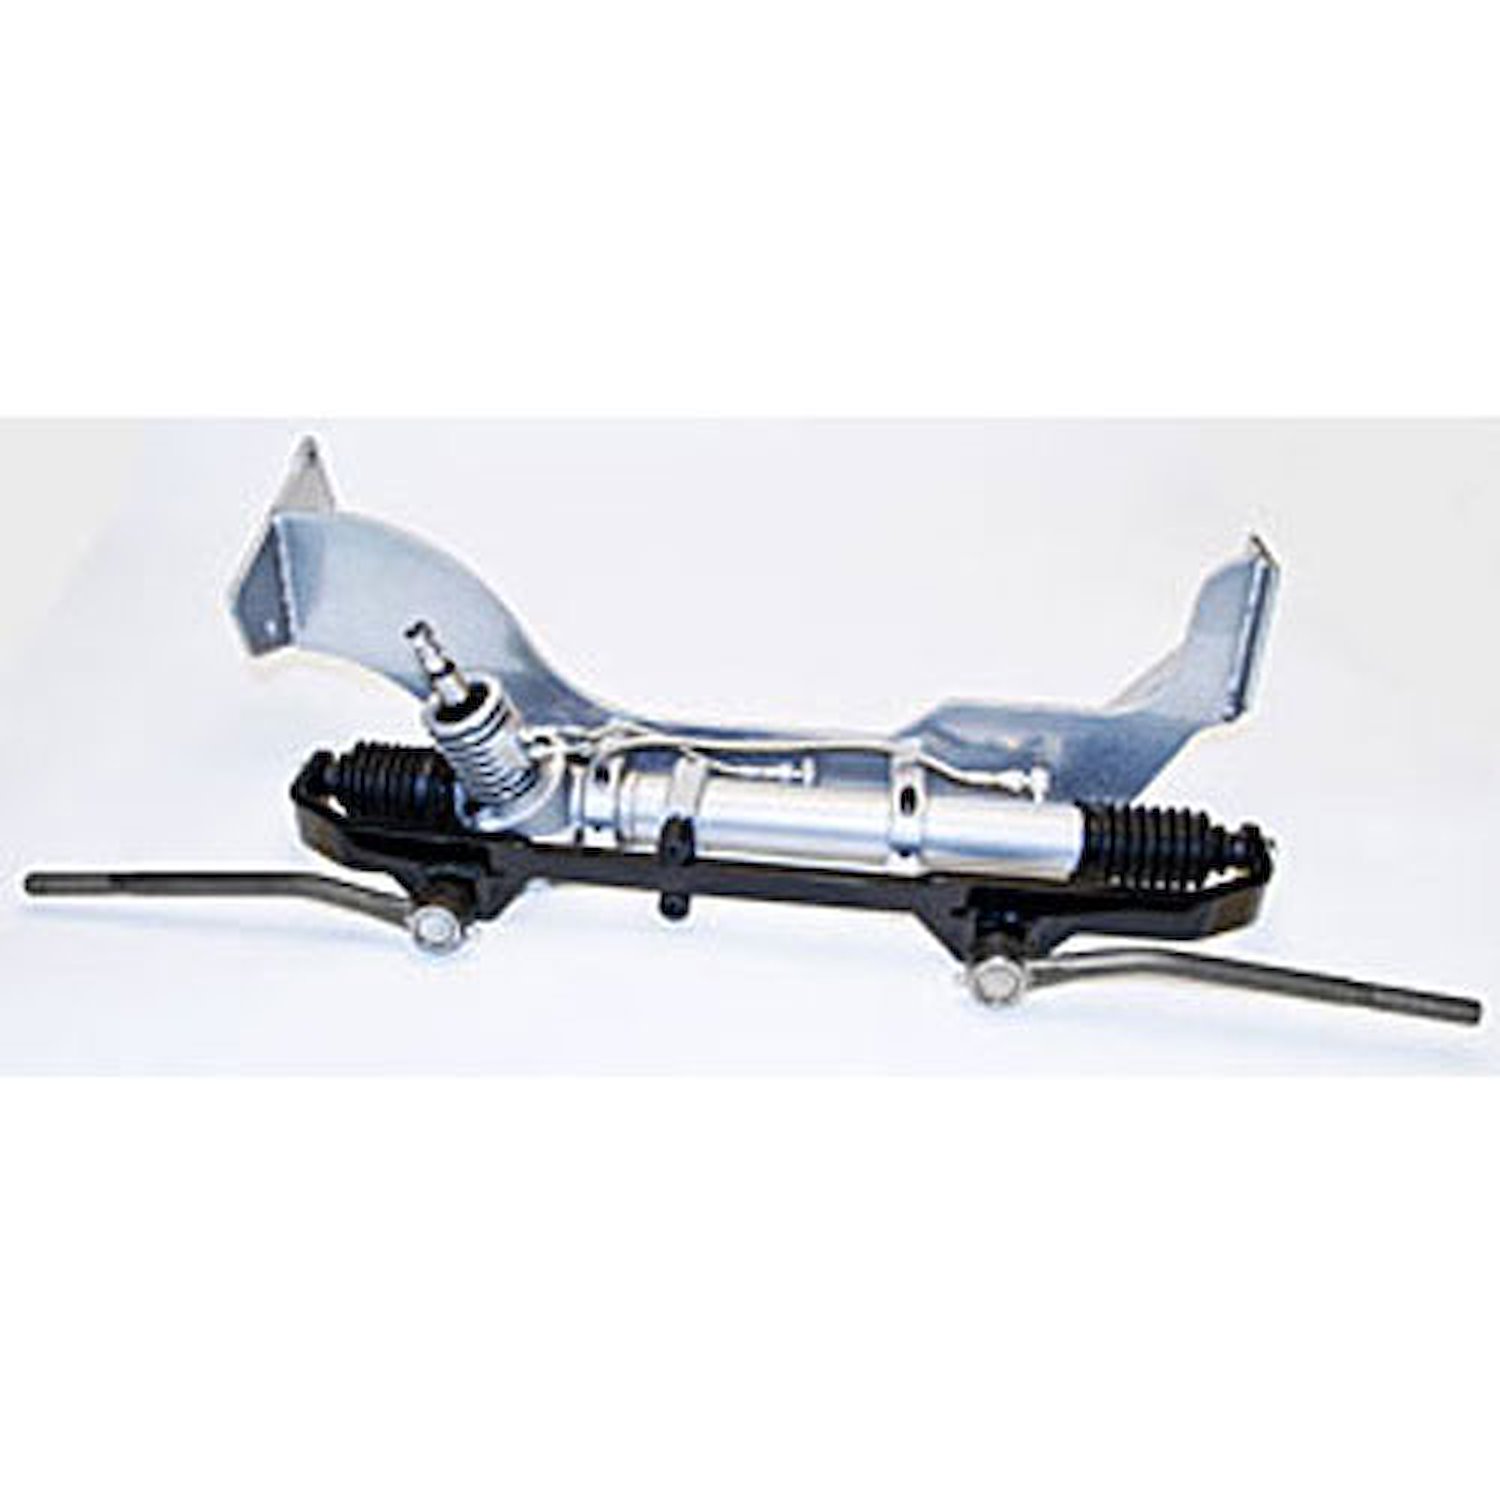 Manual Steering Rack and Pinion Cradle System 1970-81 Camaro